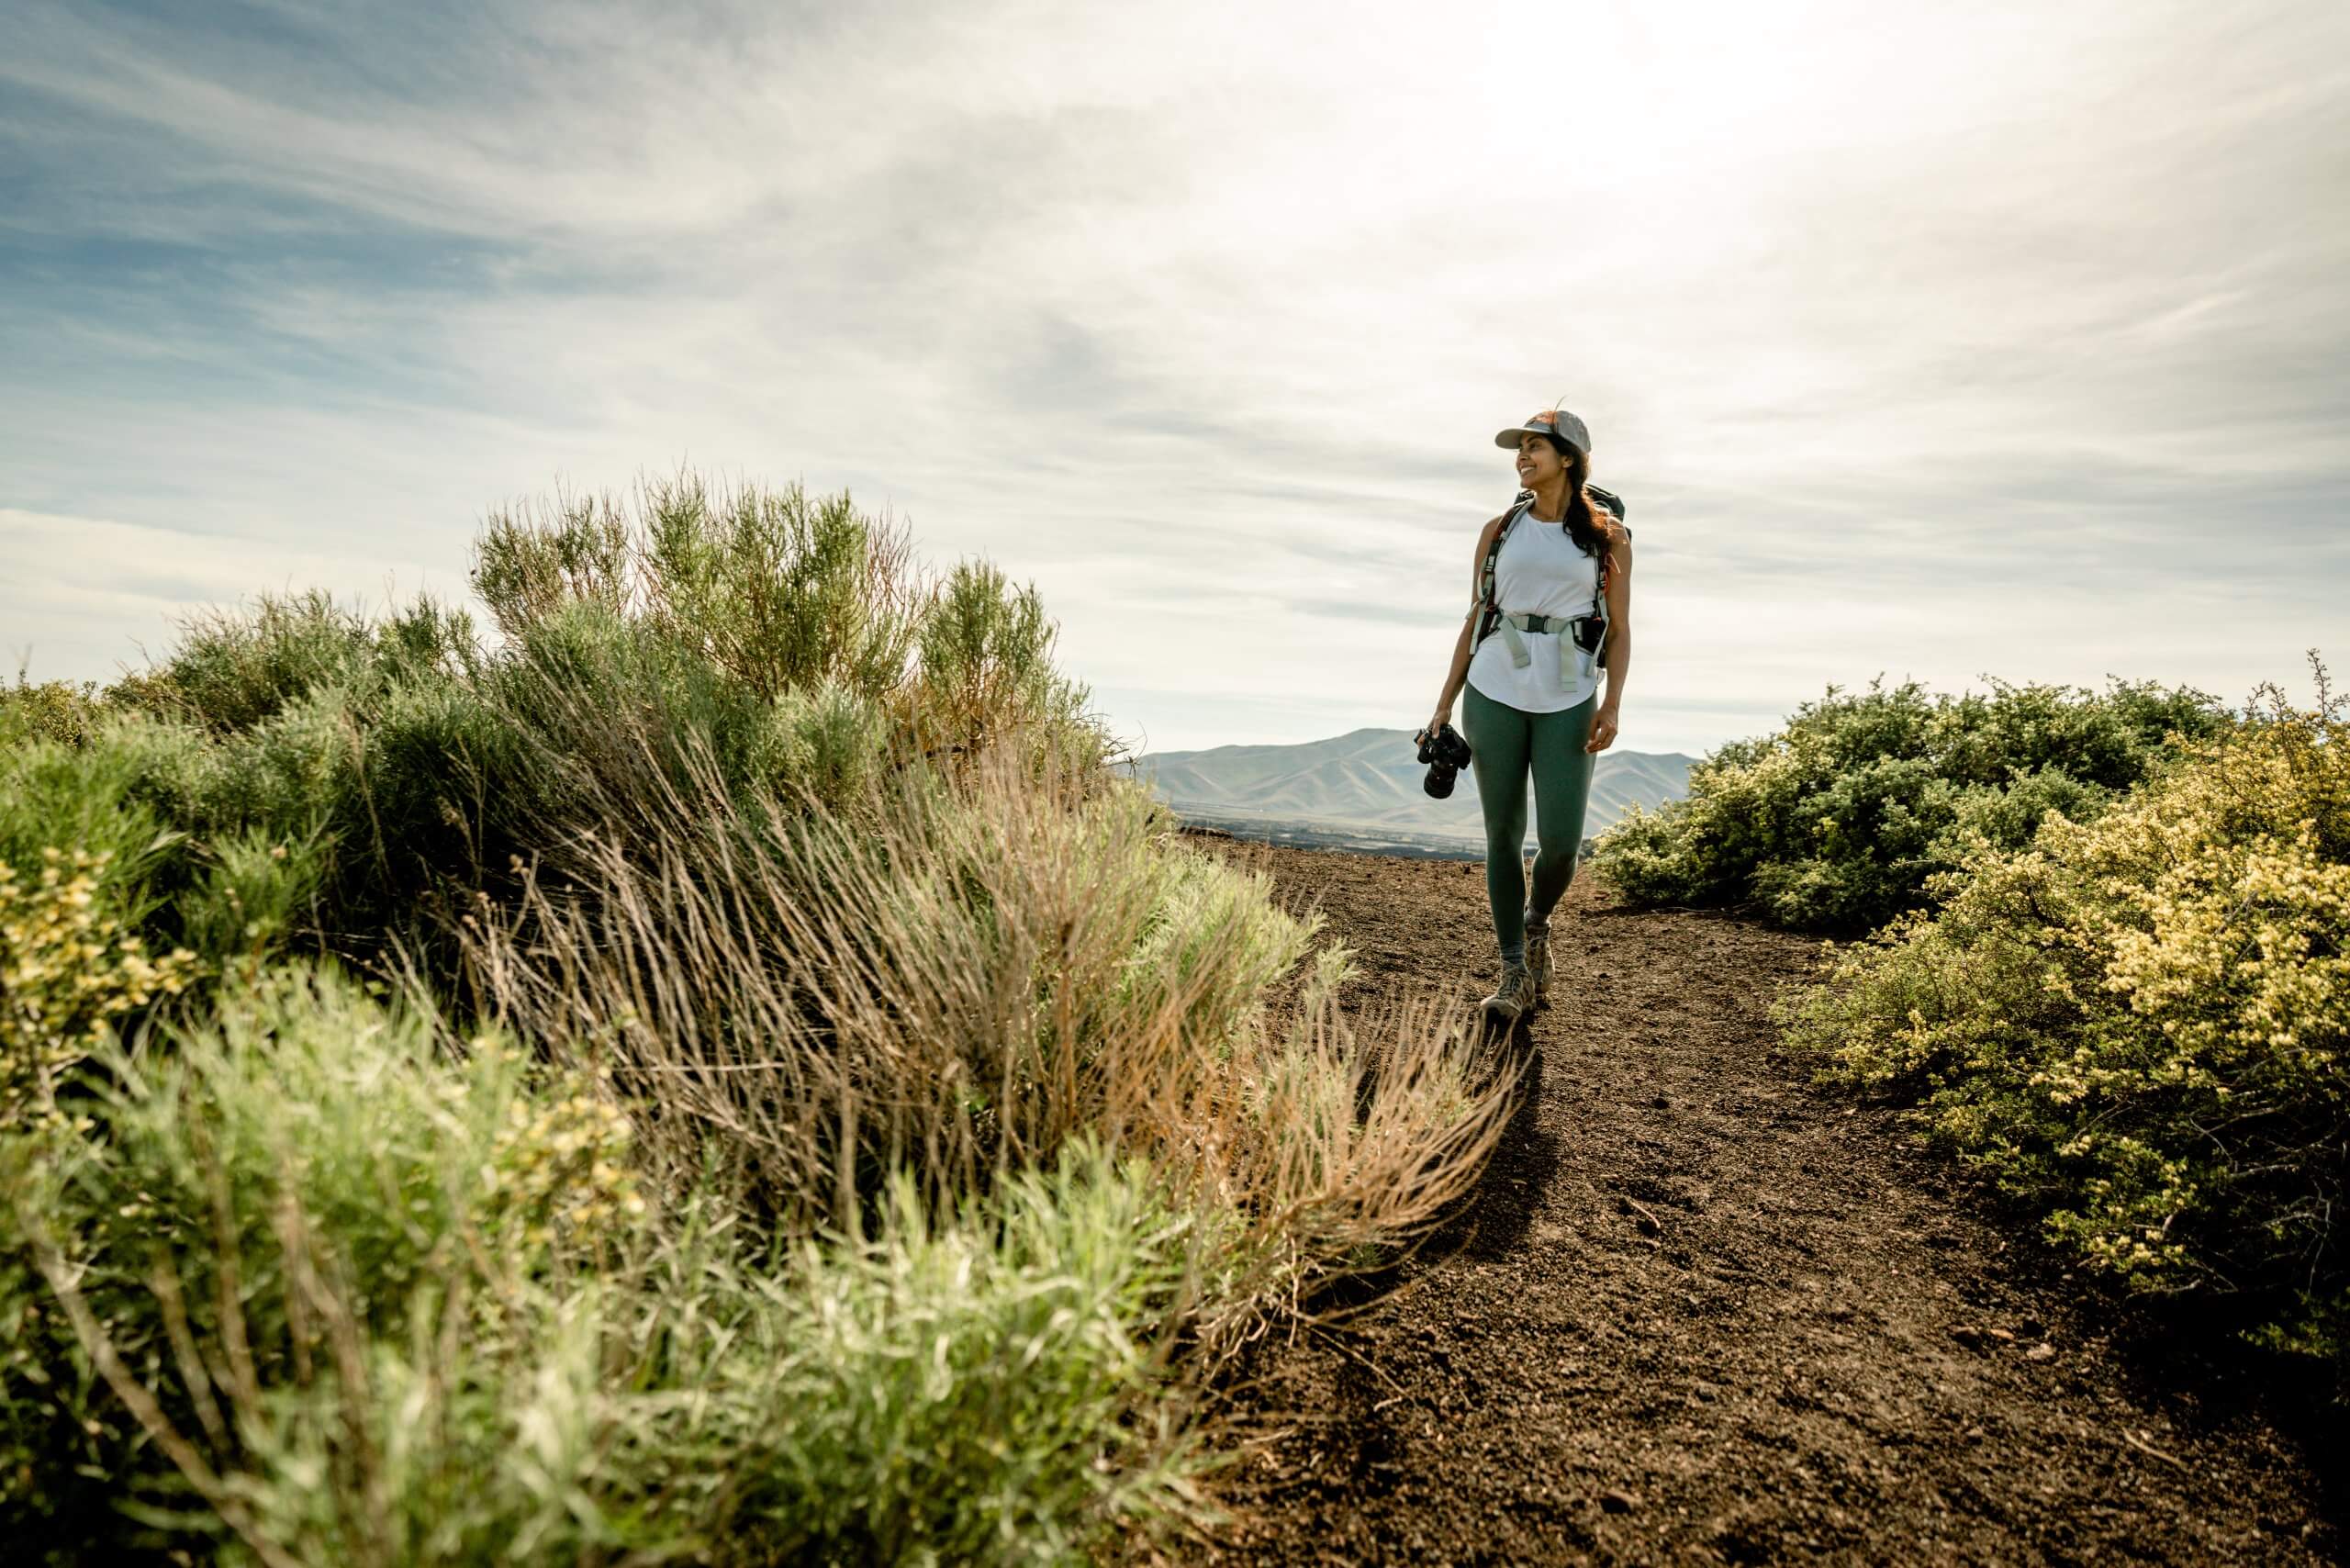 A woman hiking alone on a trail between green brush under sunny skies.